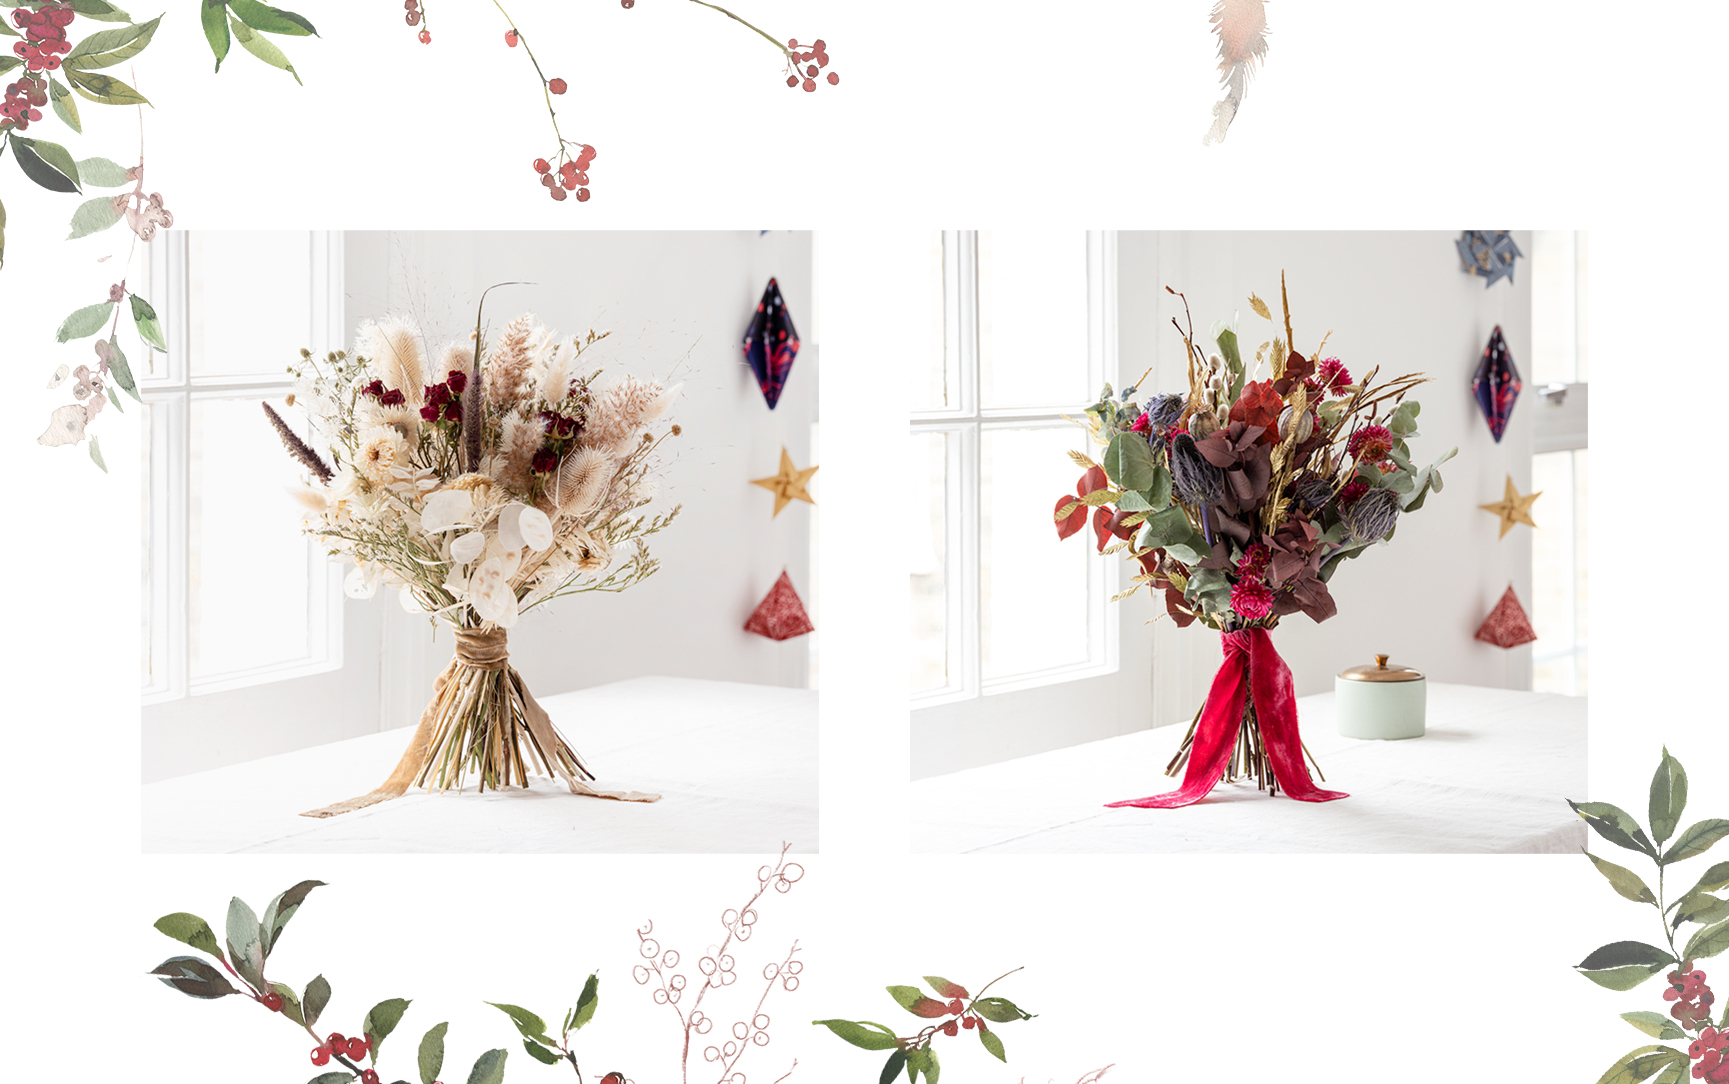 Martha and Natalia Large Festive Dried Flower Bouquets with winter foliage decoration